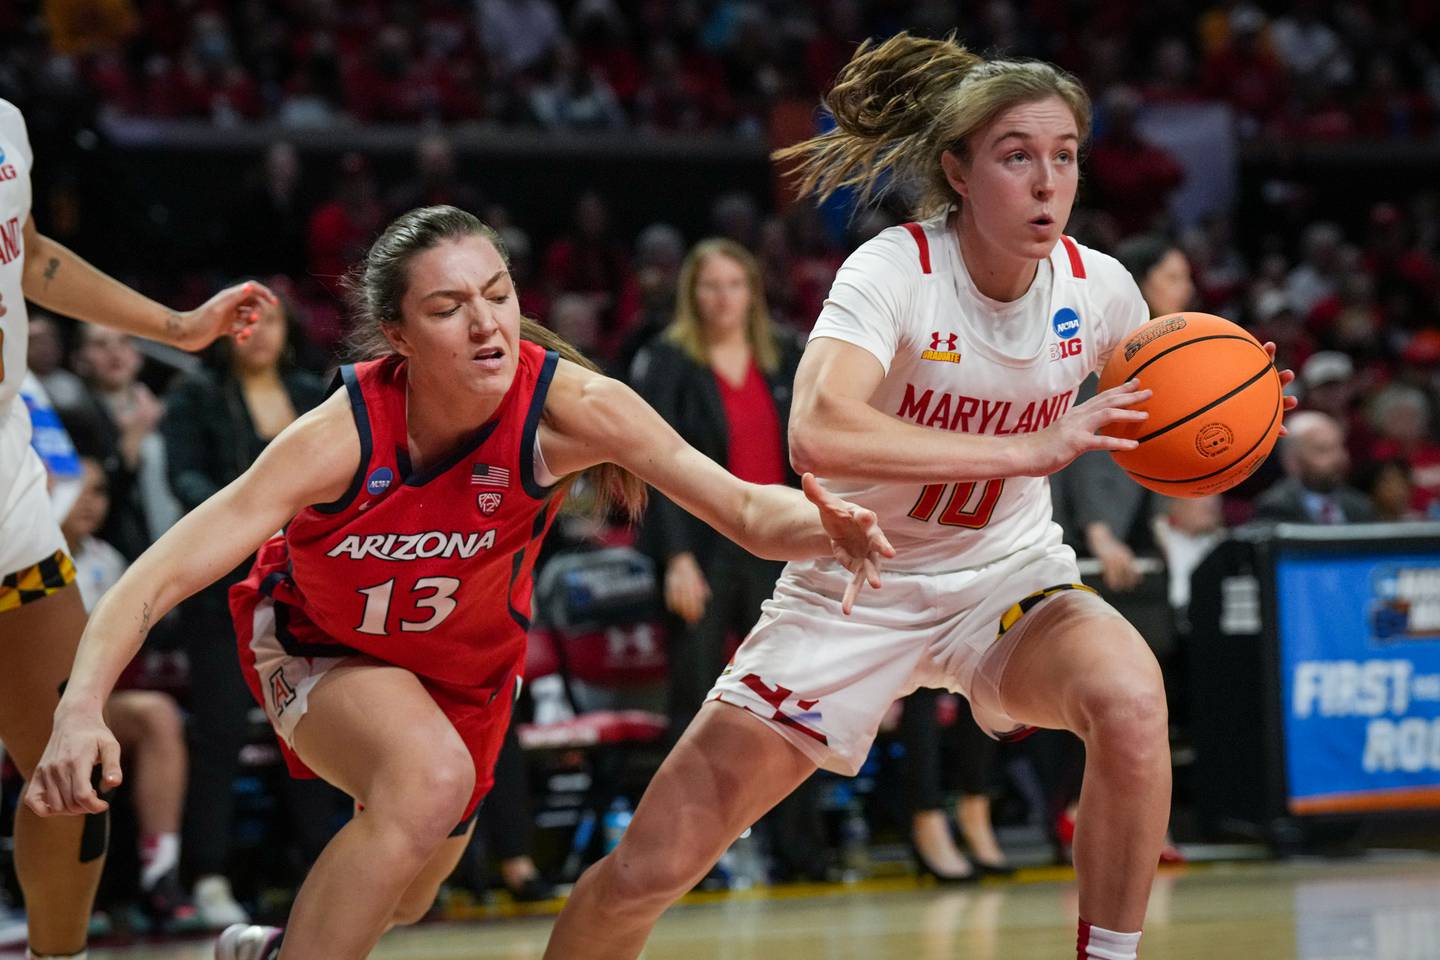 Maryland’s Abby Meyers (10) steals the ball from Arizona’s Helena Pueyo (13) at the XFINITY Center during a tournament game between the No. 2 Maryland Terrapins and the No. 7 Arizona Wildcats. The University of Maryland beat the University of Arizona, 77-64, in the second round of the NCAA Women’s Basketball Tournament.